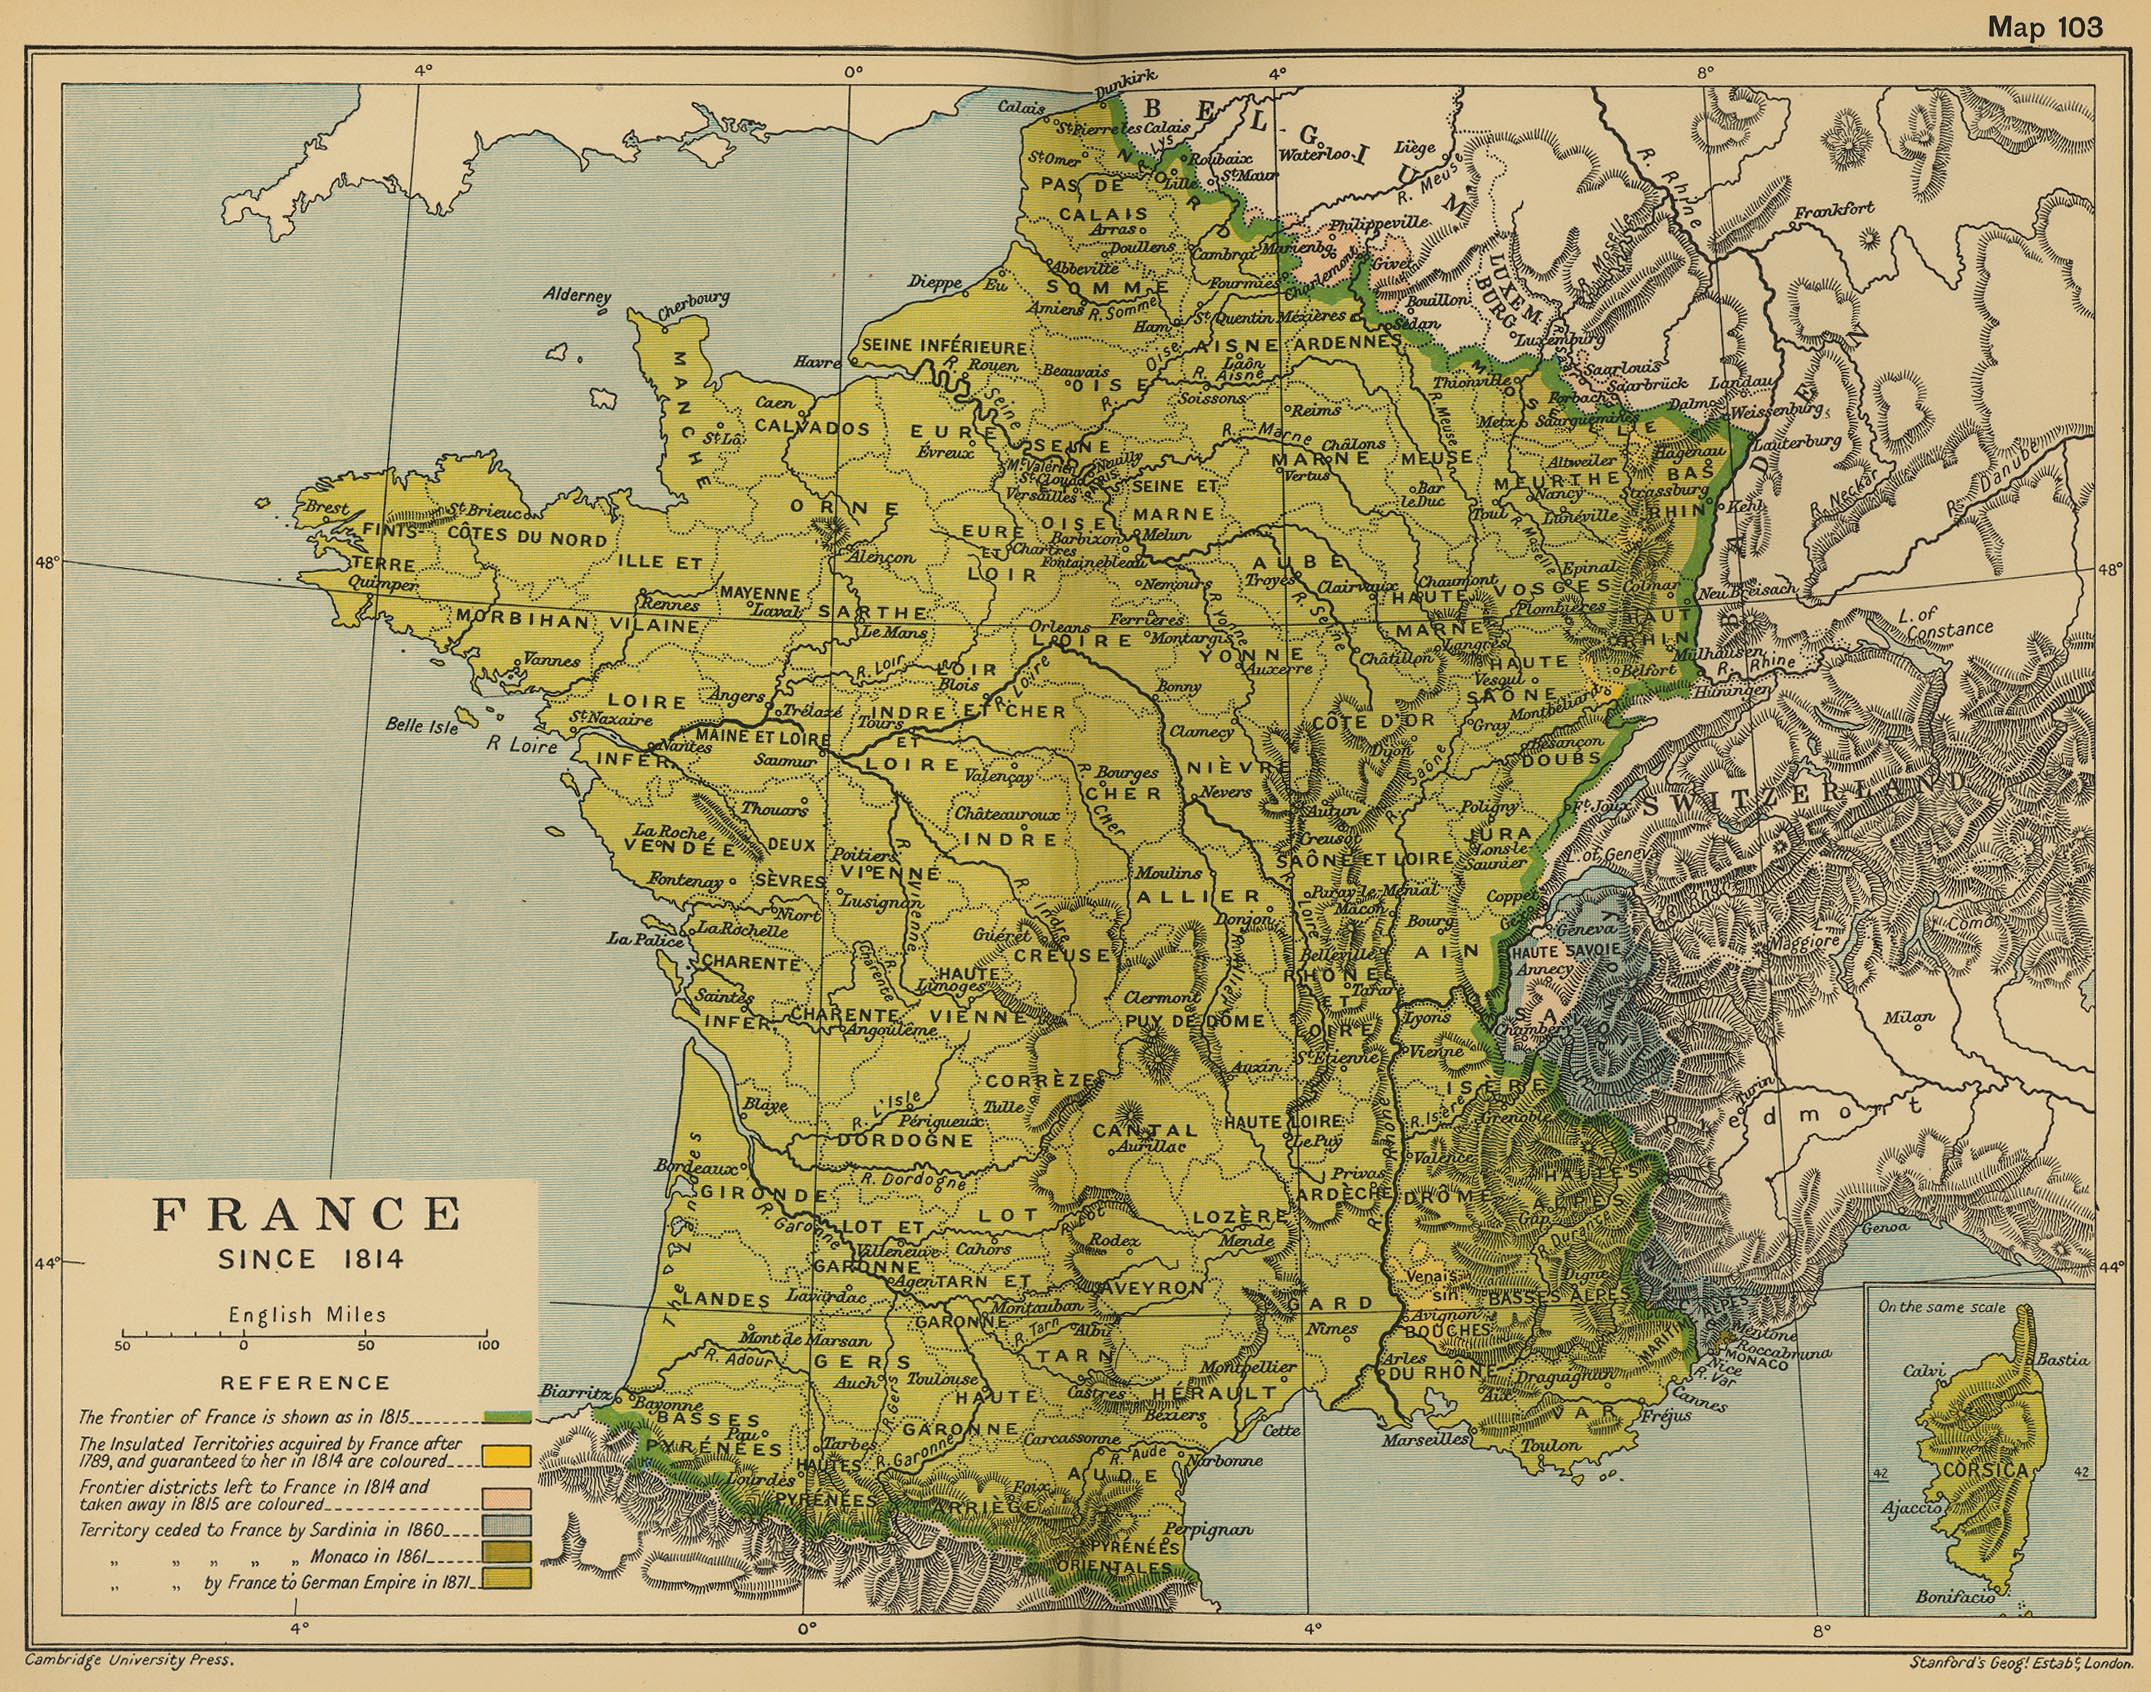 1814 Map of France